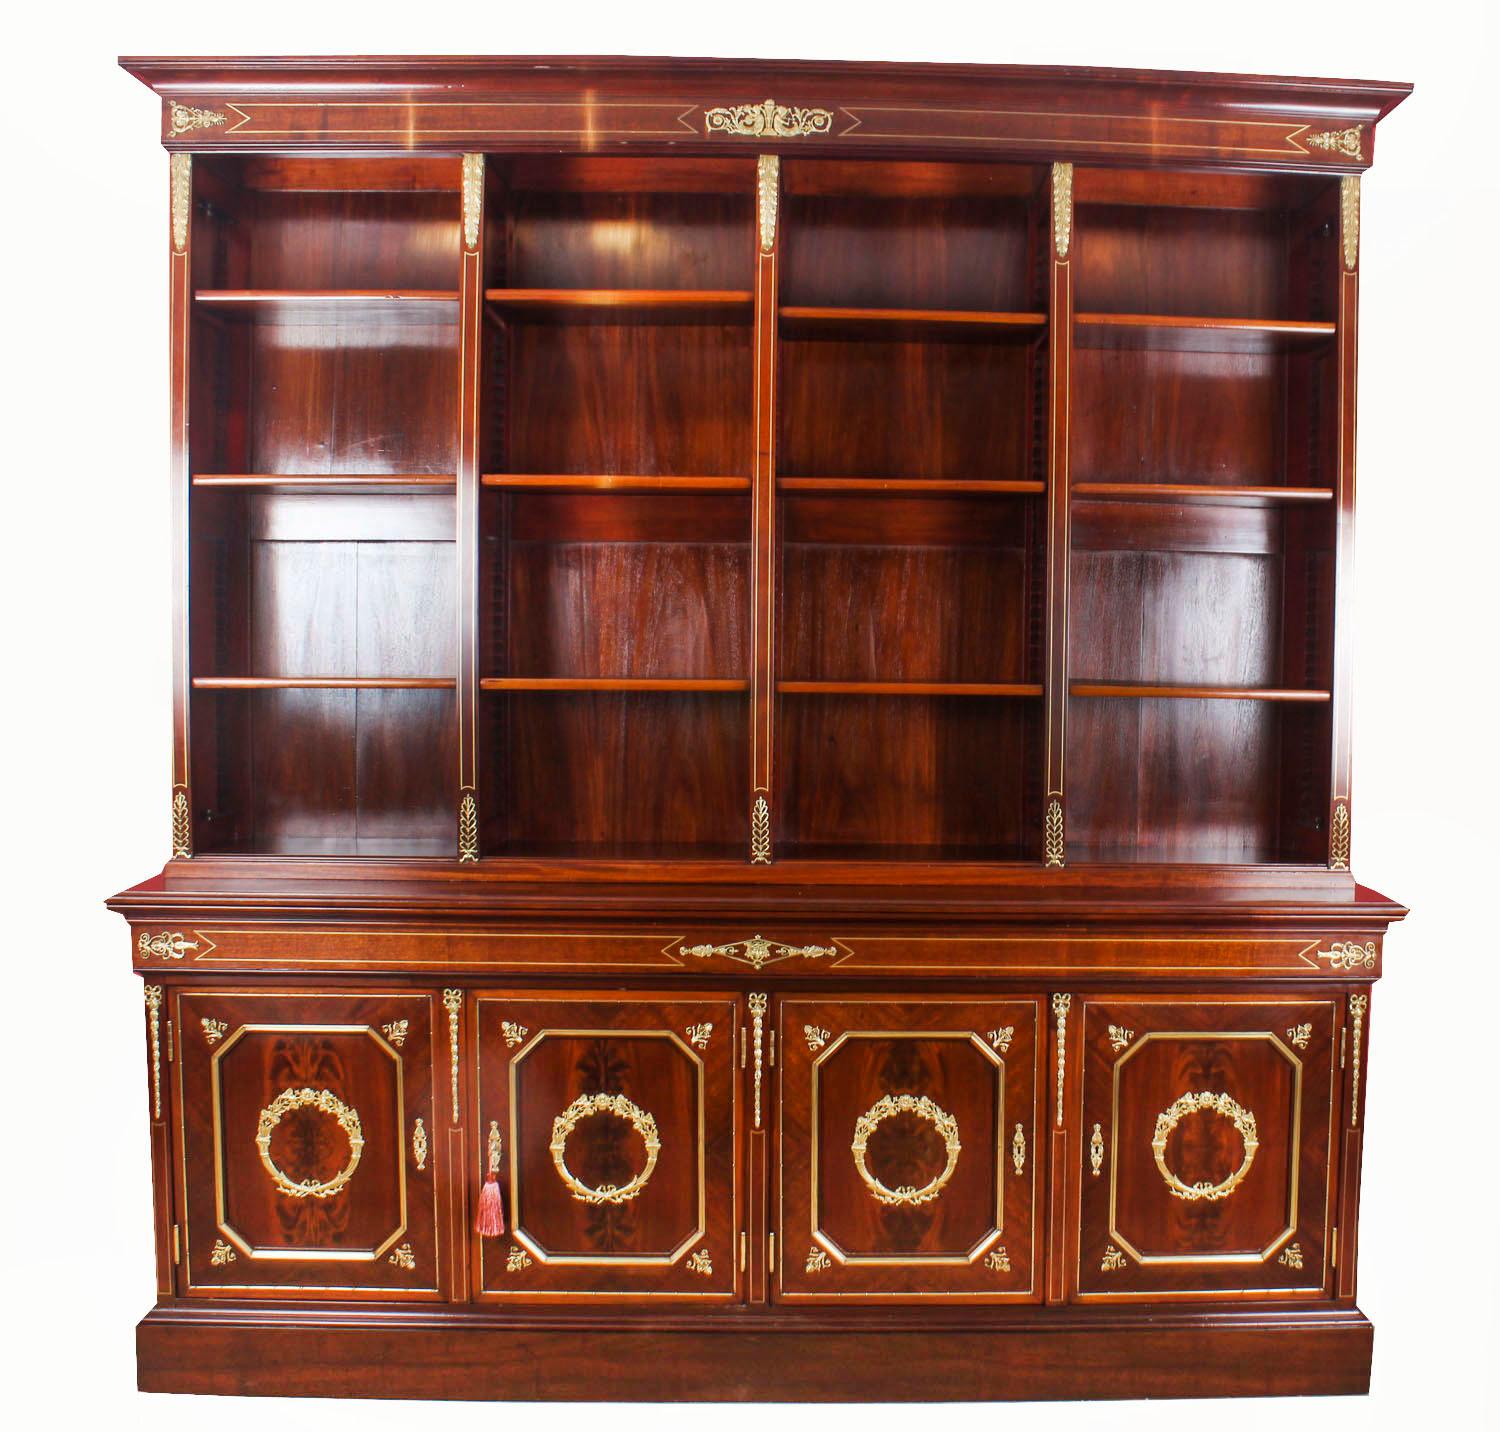 This is a spectacular large exceptional quality antique French Napoleon III Empire Flame mahogany bookcase with fabulous ormolu mounts, circa 1870 in date.

The bookcase rising from a shaped plinth base, the four lower lockable panelled doors house